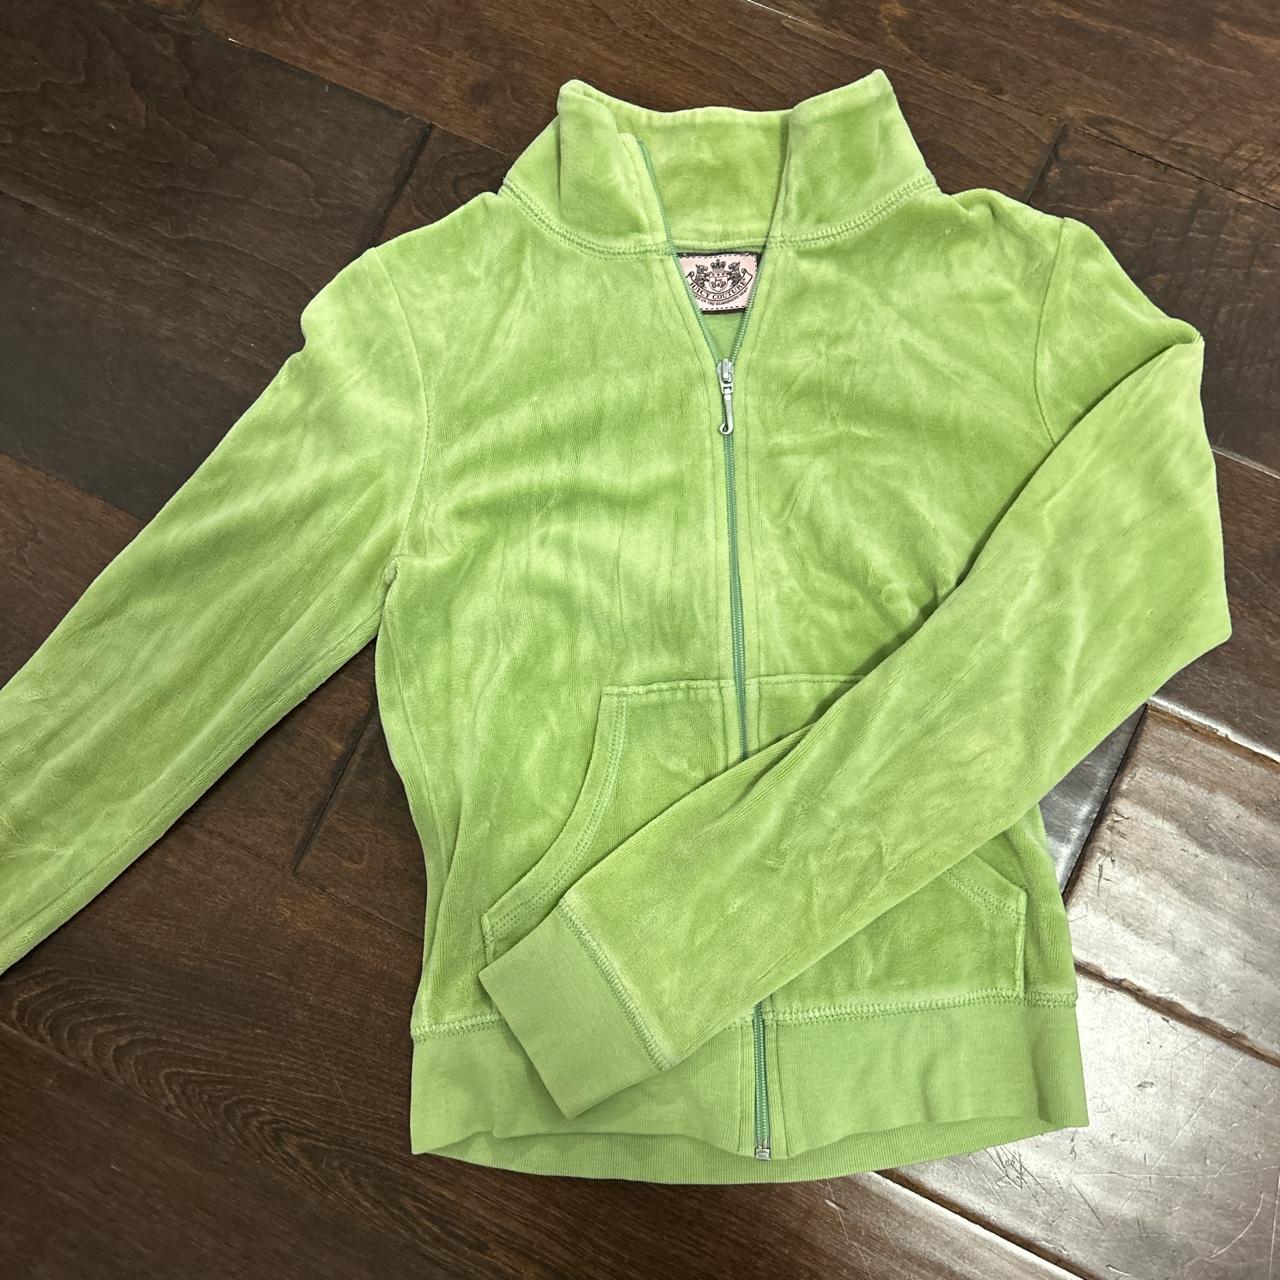 Juicy Couture Jacket Light green and navy... - Depop